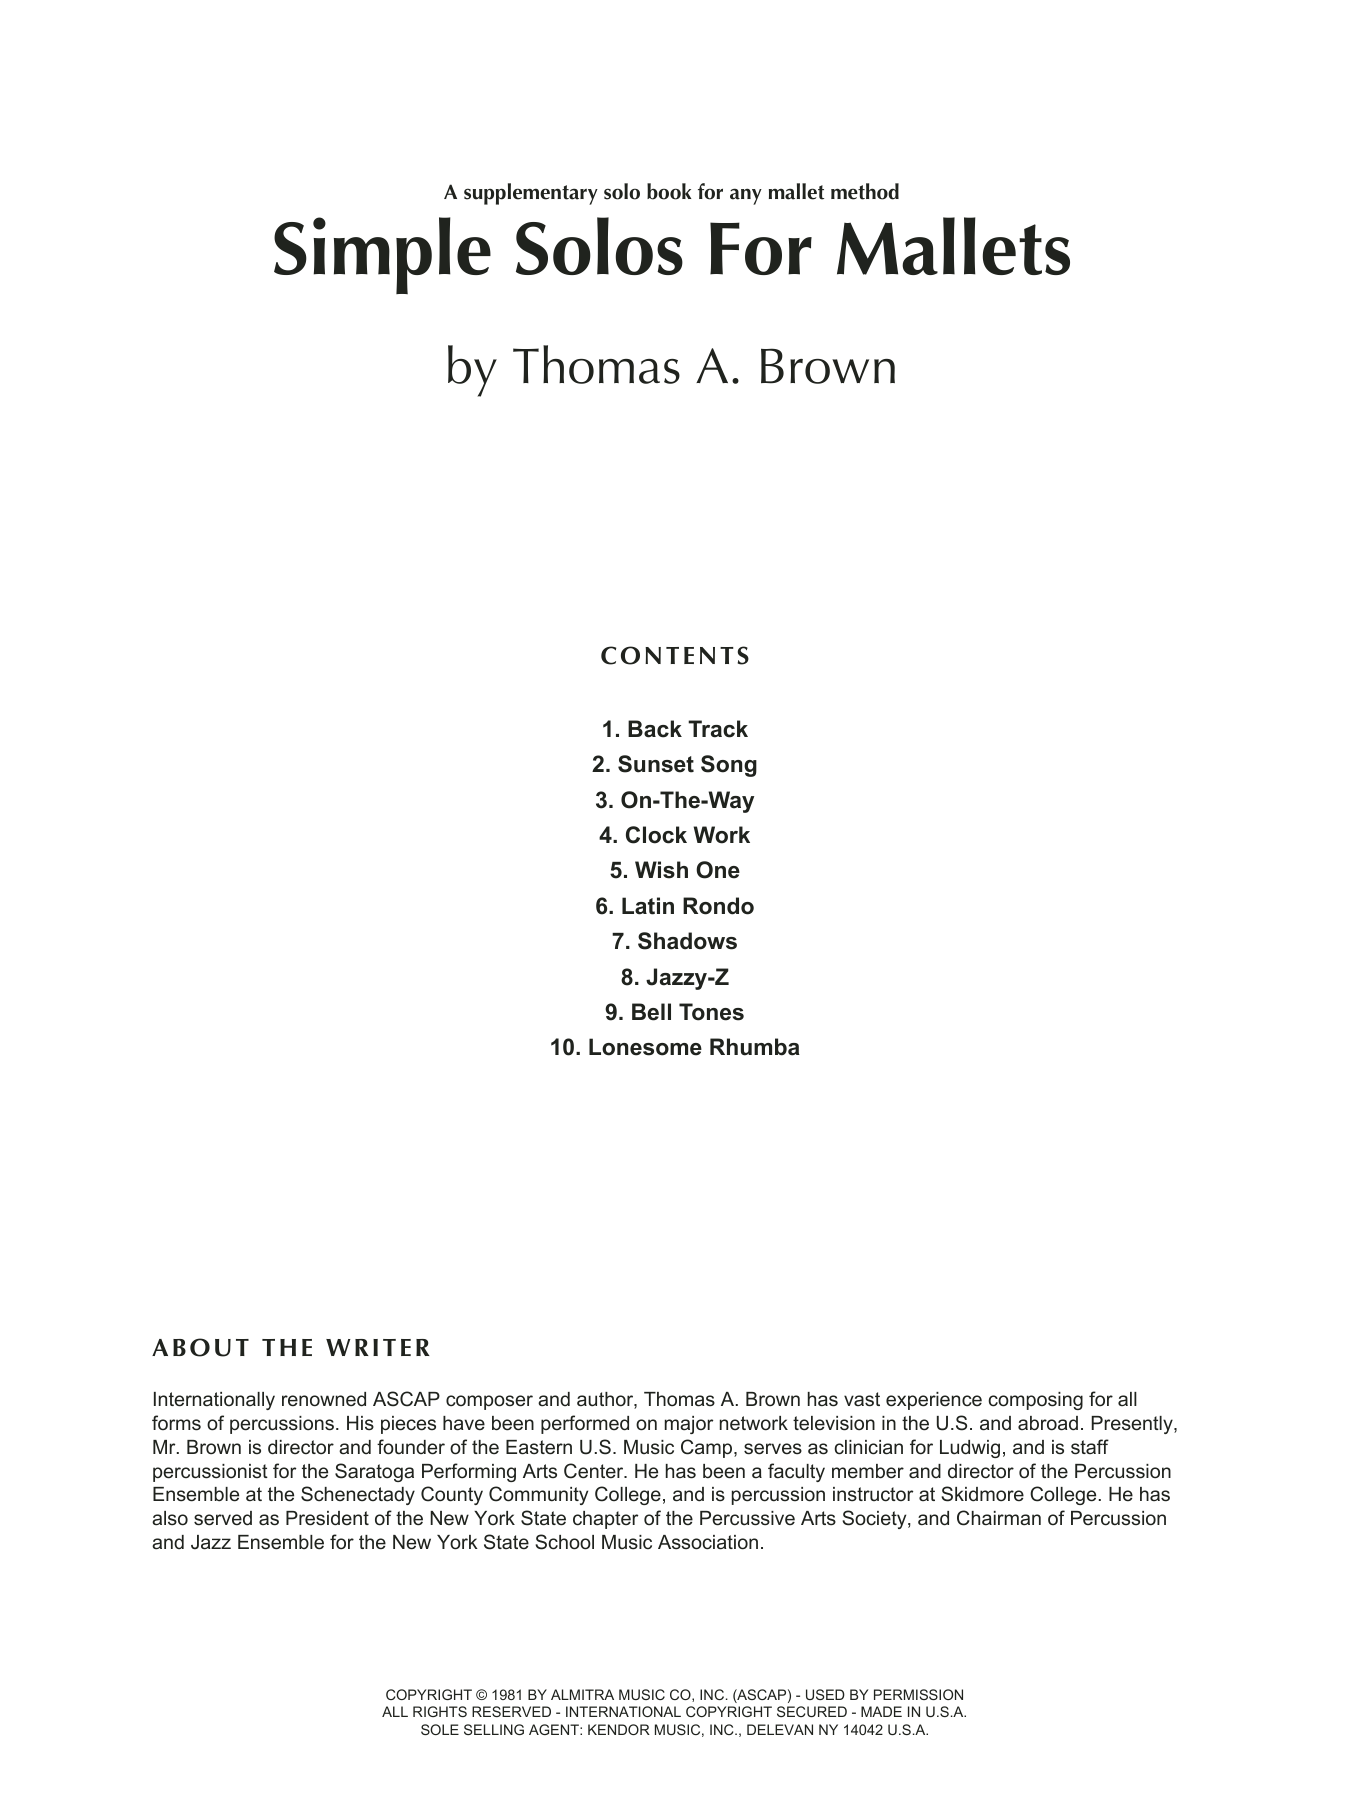 Download Tom Brown Simple Solos For Mallets Sheet Music